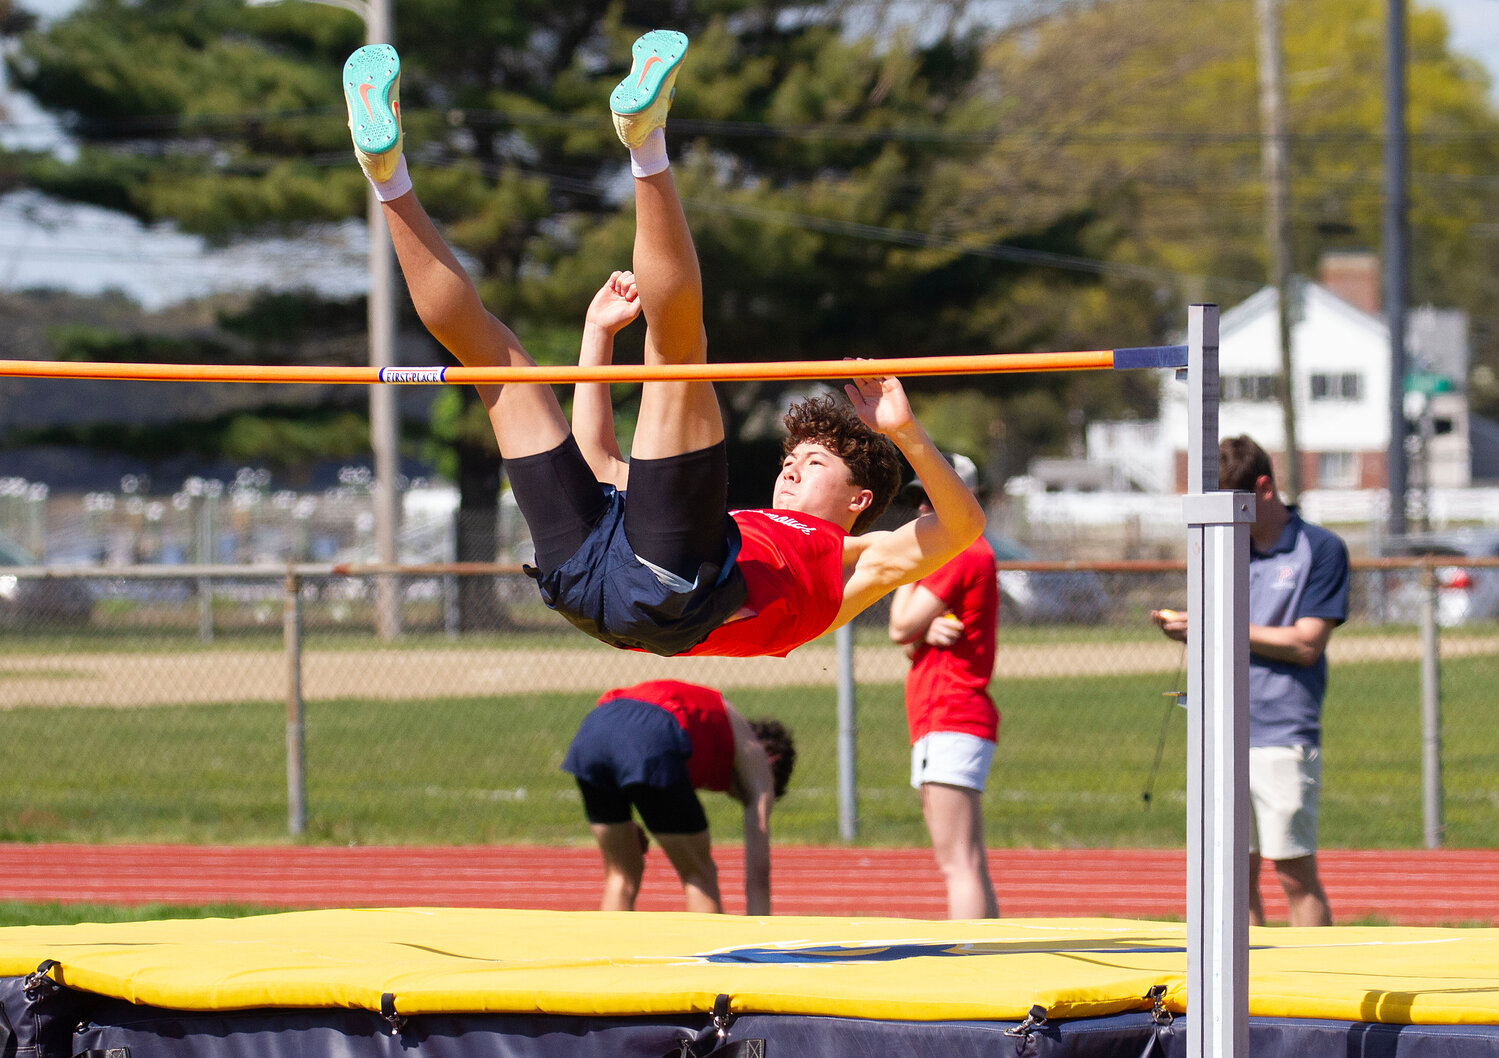 Aidan Chen took first place in the high jump with a best effort of 6 feet, 2 inches.